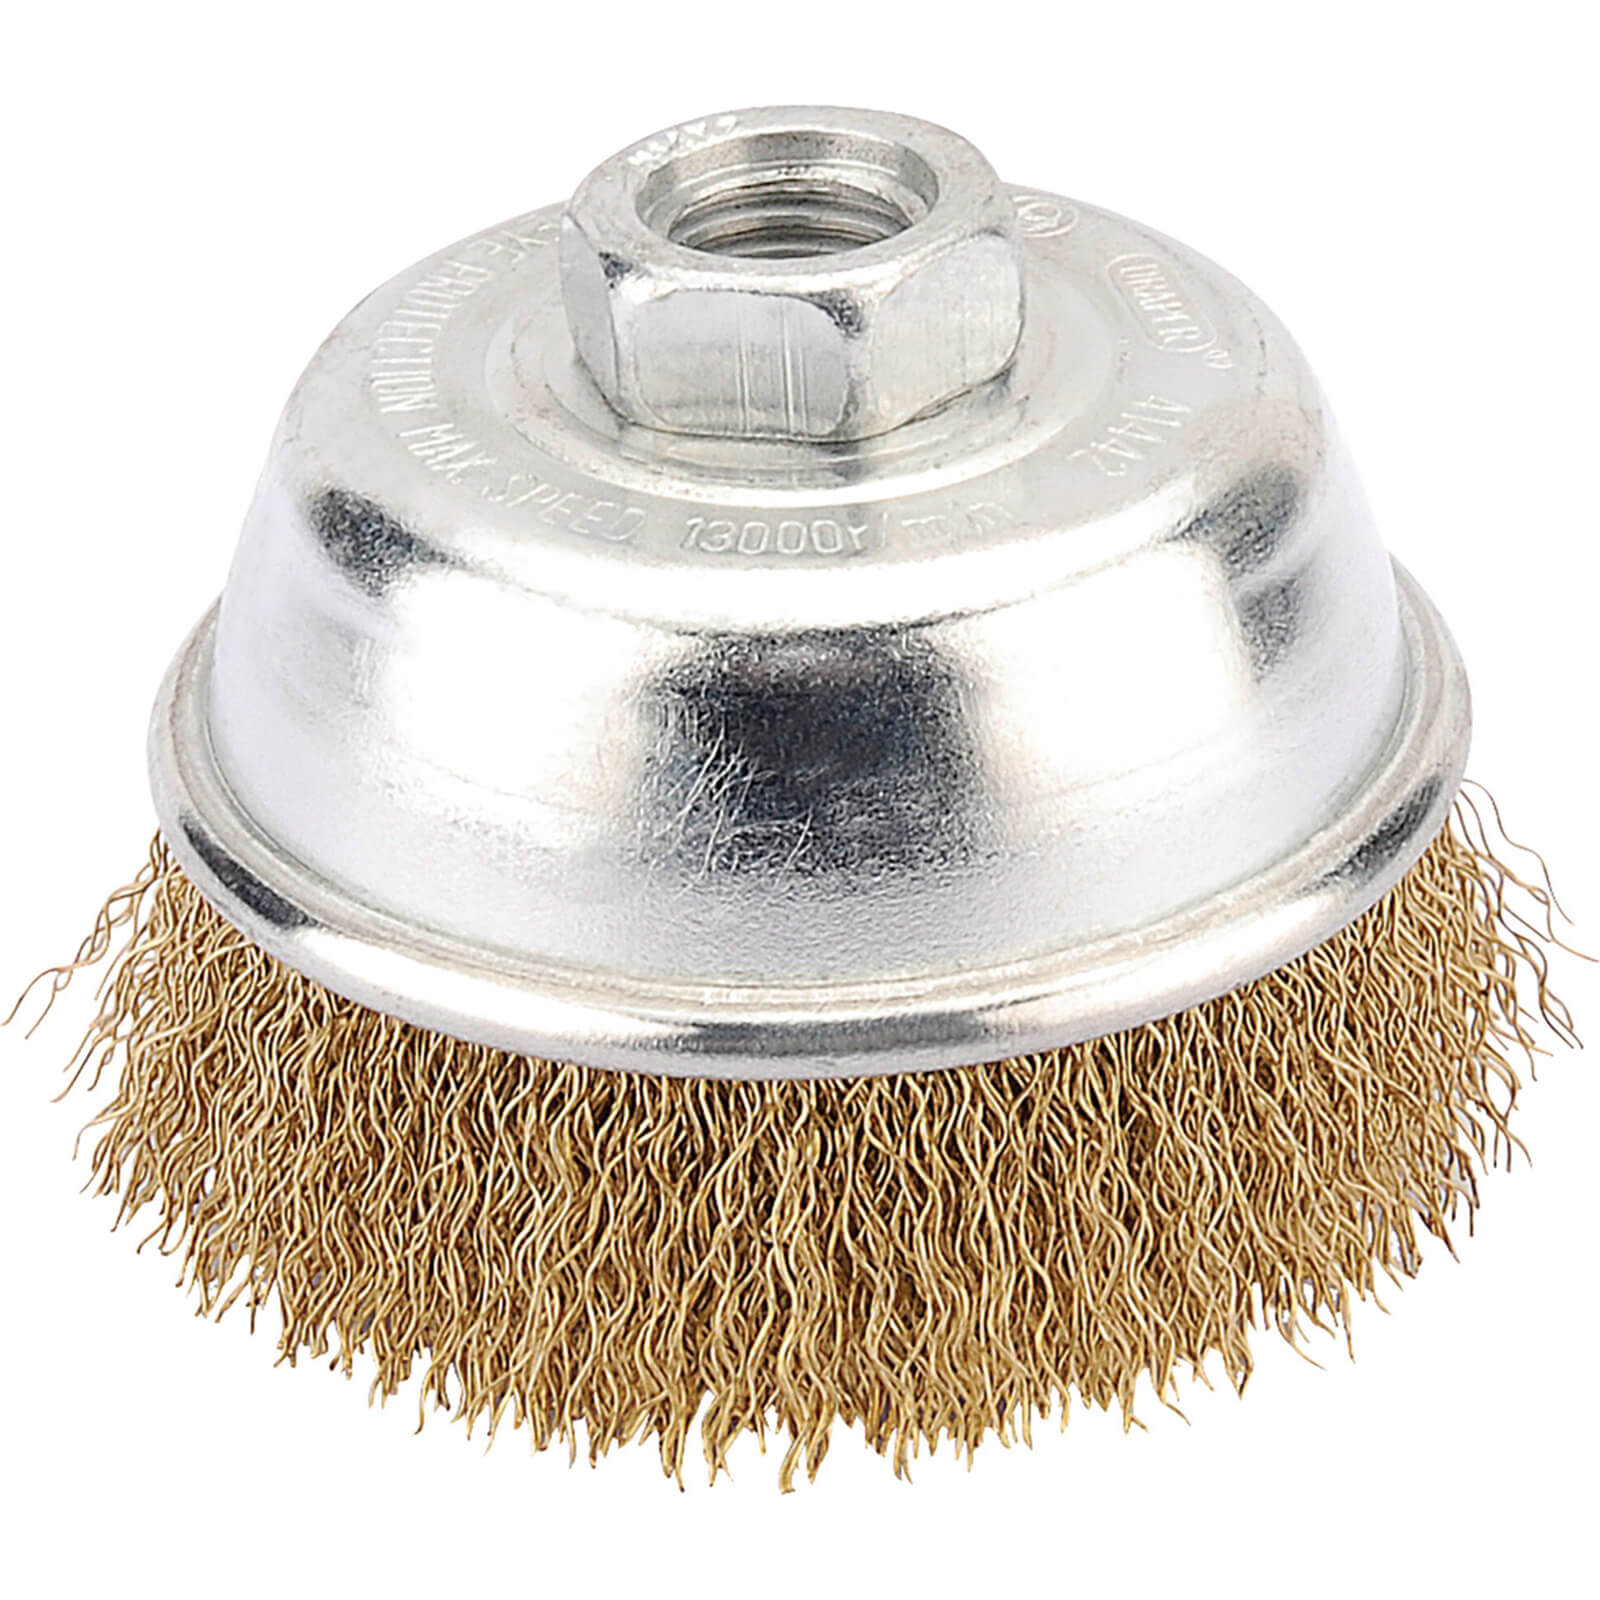 Photo of Draper Long Life Brassed Wire Cup Brush 75mm M14 Thread